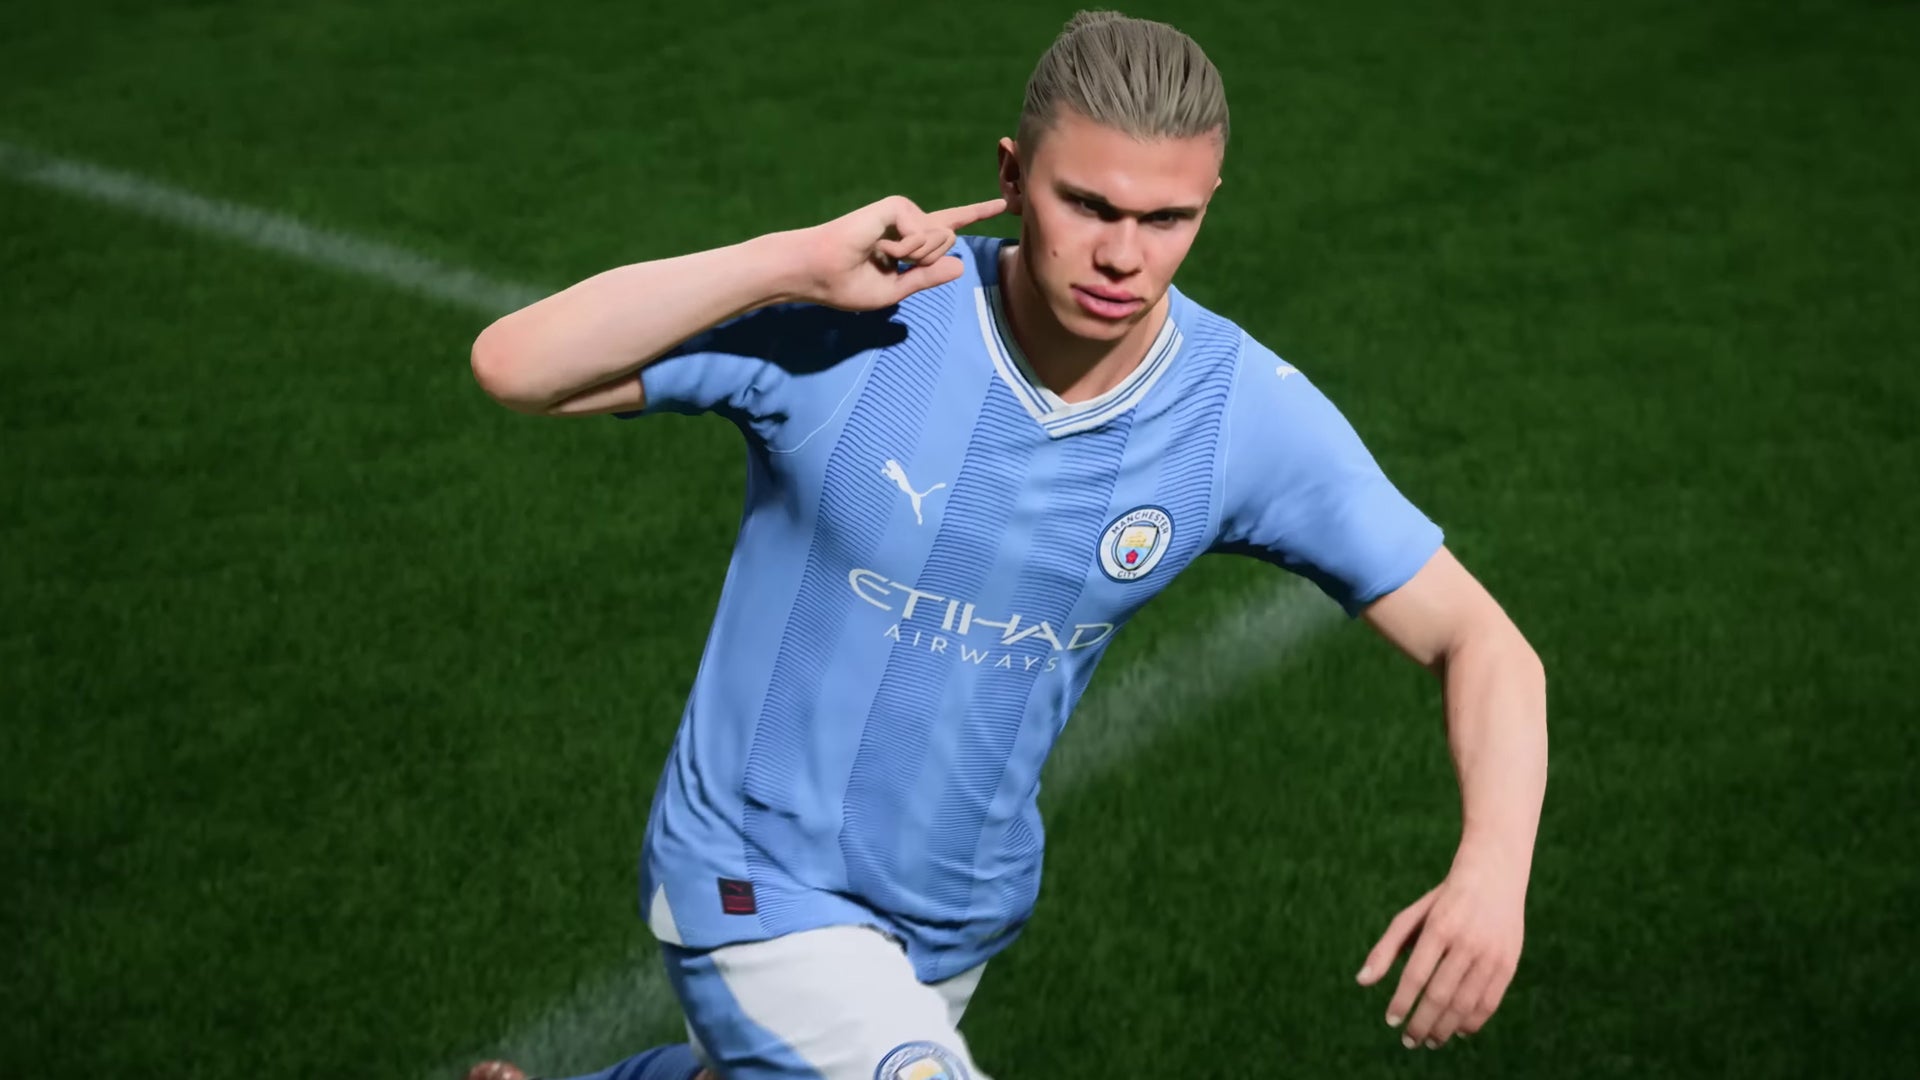 EA Sports FC 24 System Requirements - Minimum and Recommended